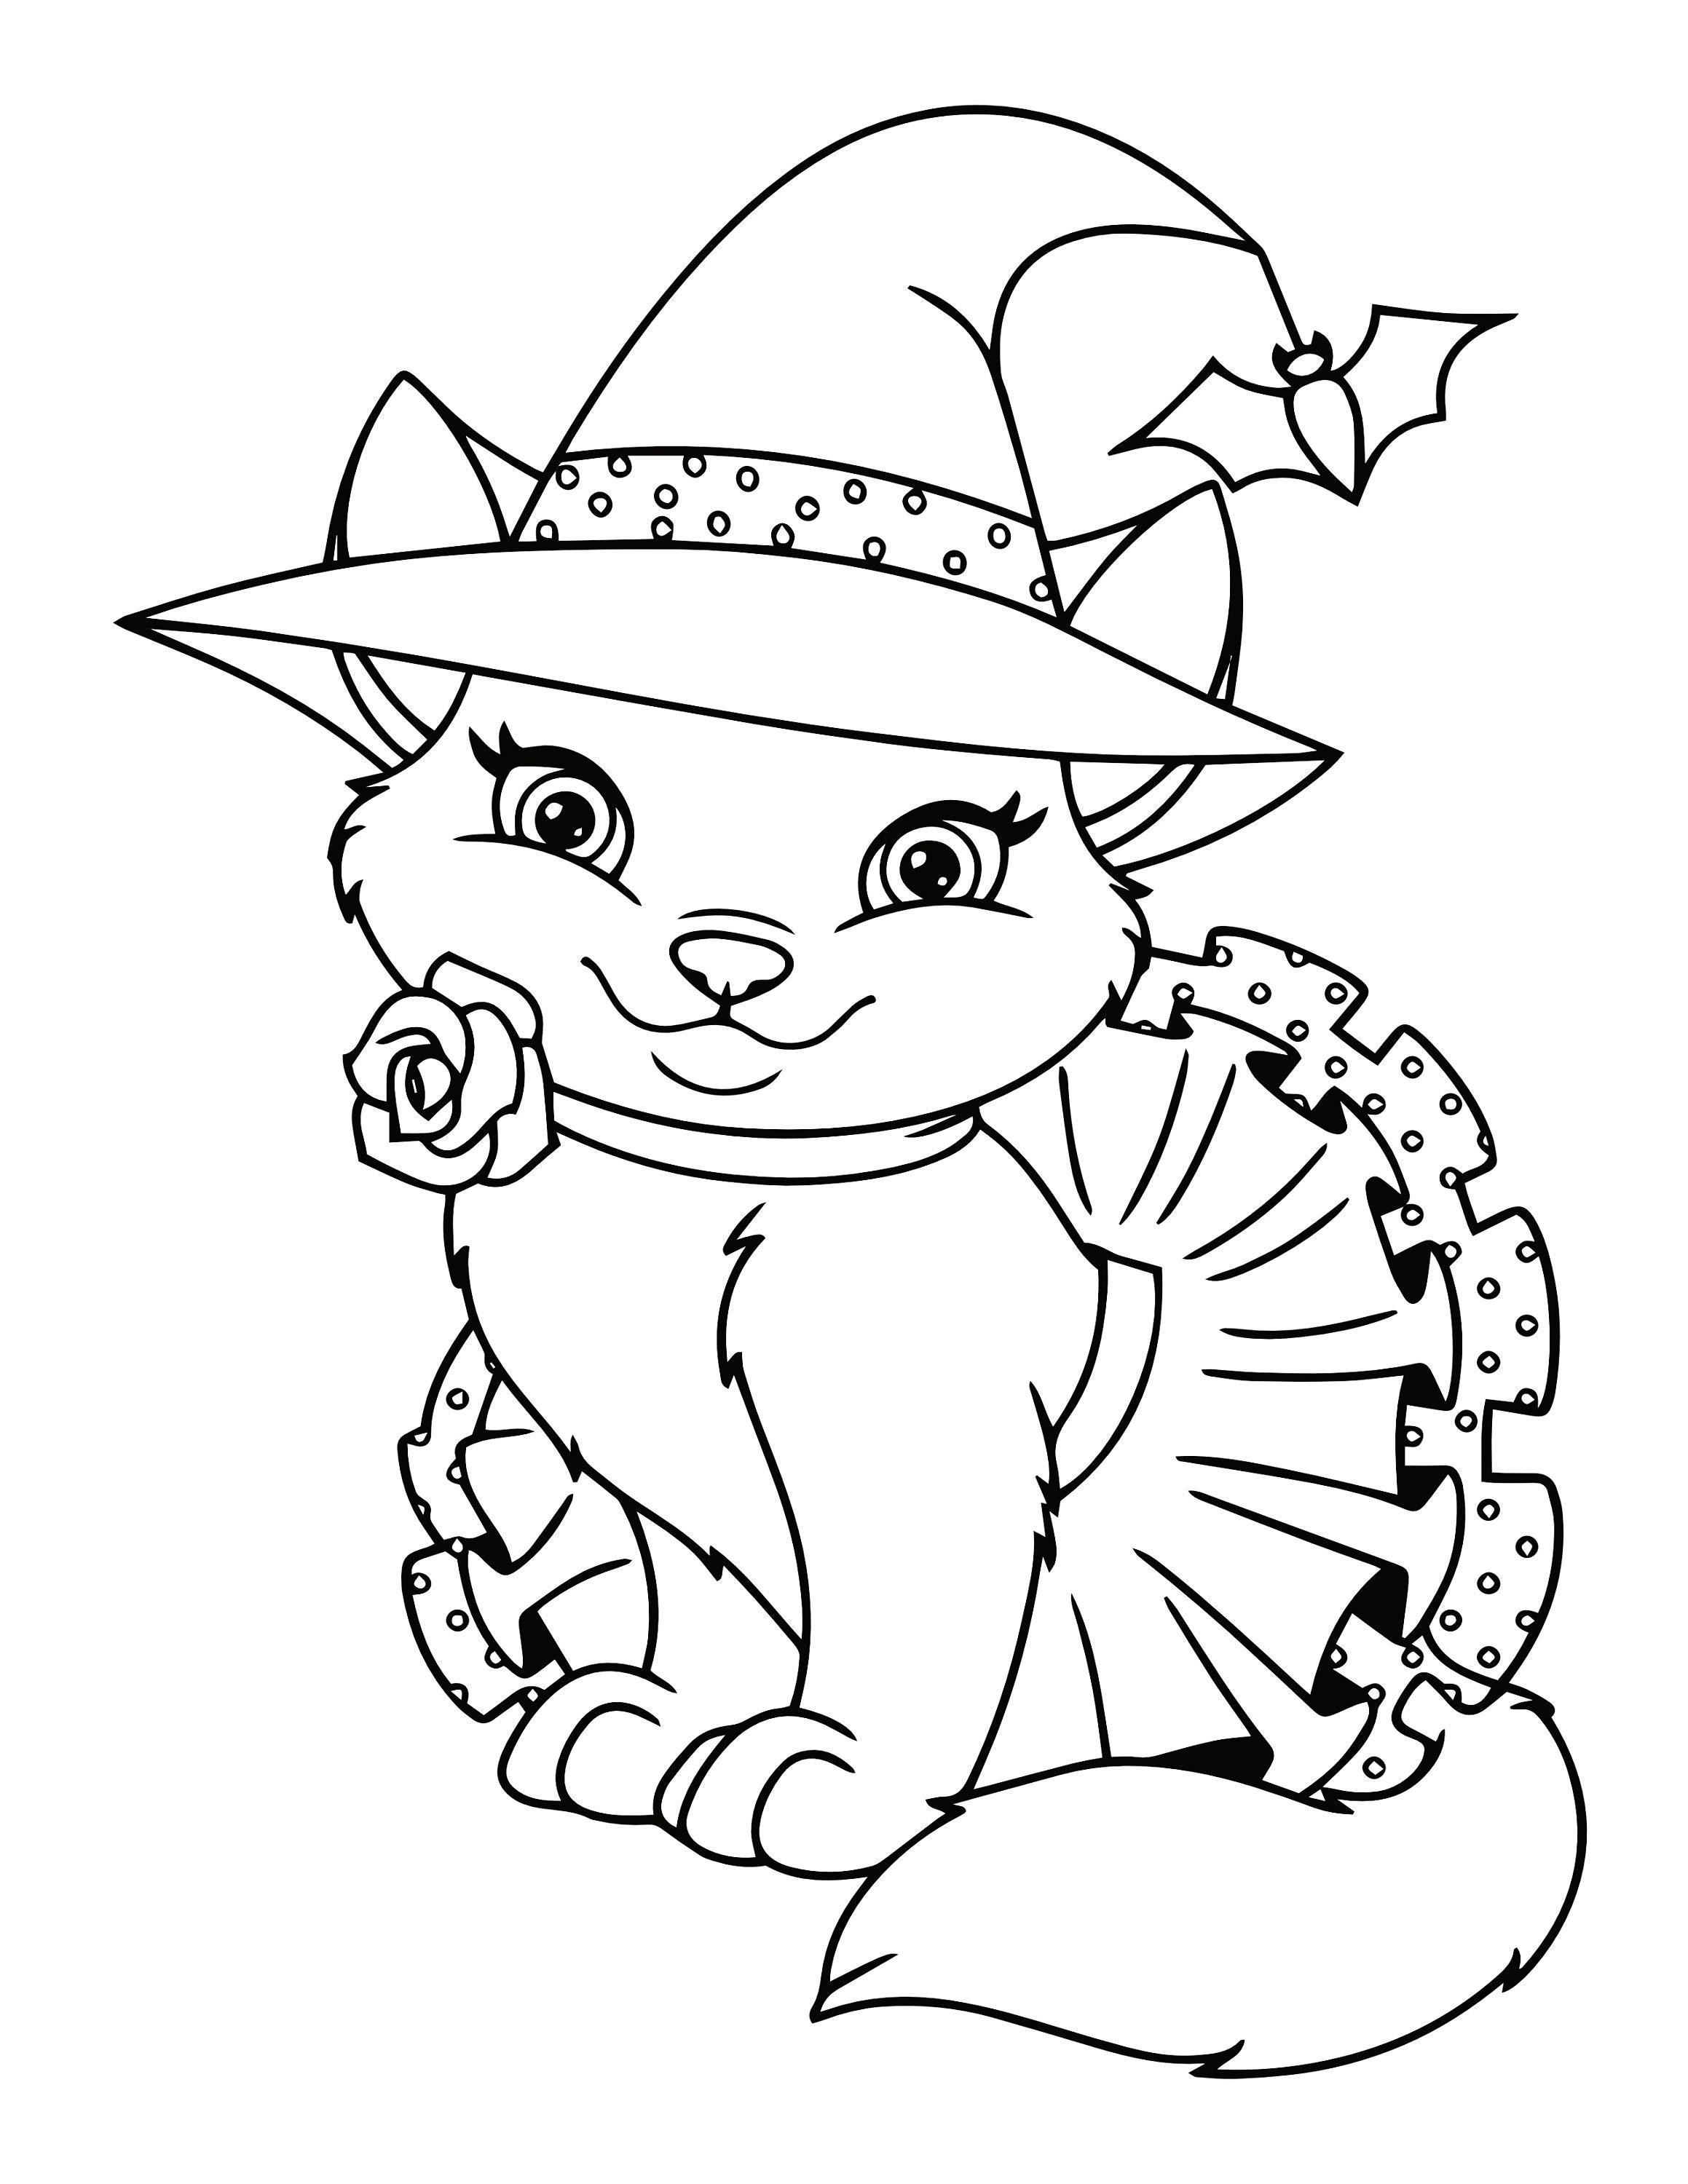 Kitten Coloring Pages 20 Printable Kitten Coloring Pages for   Etsy